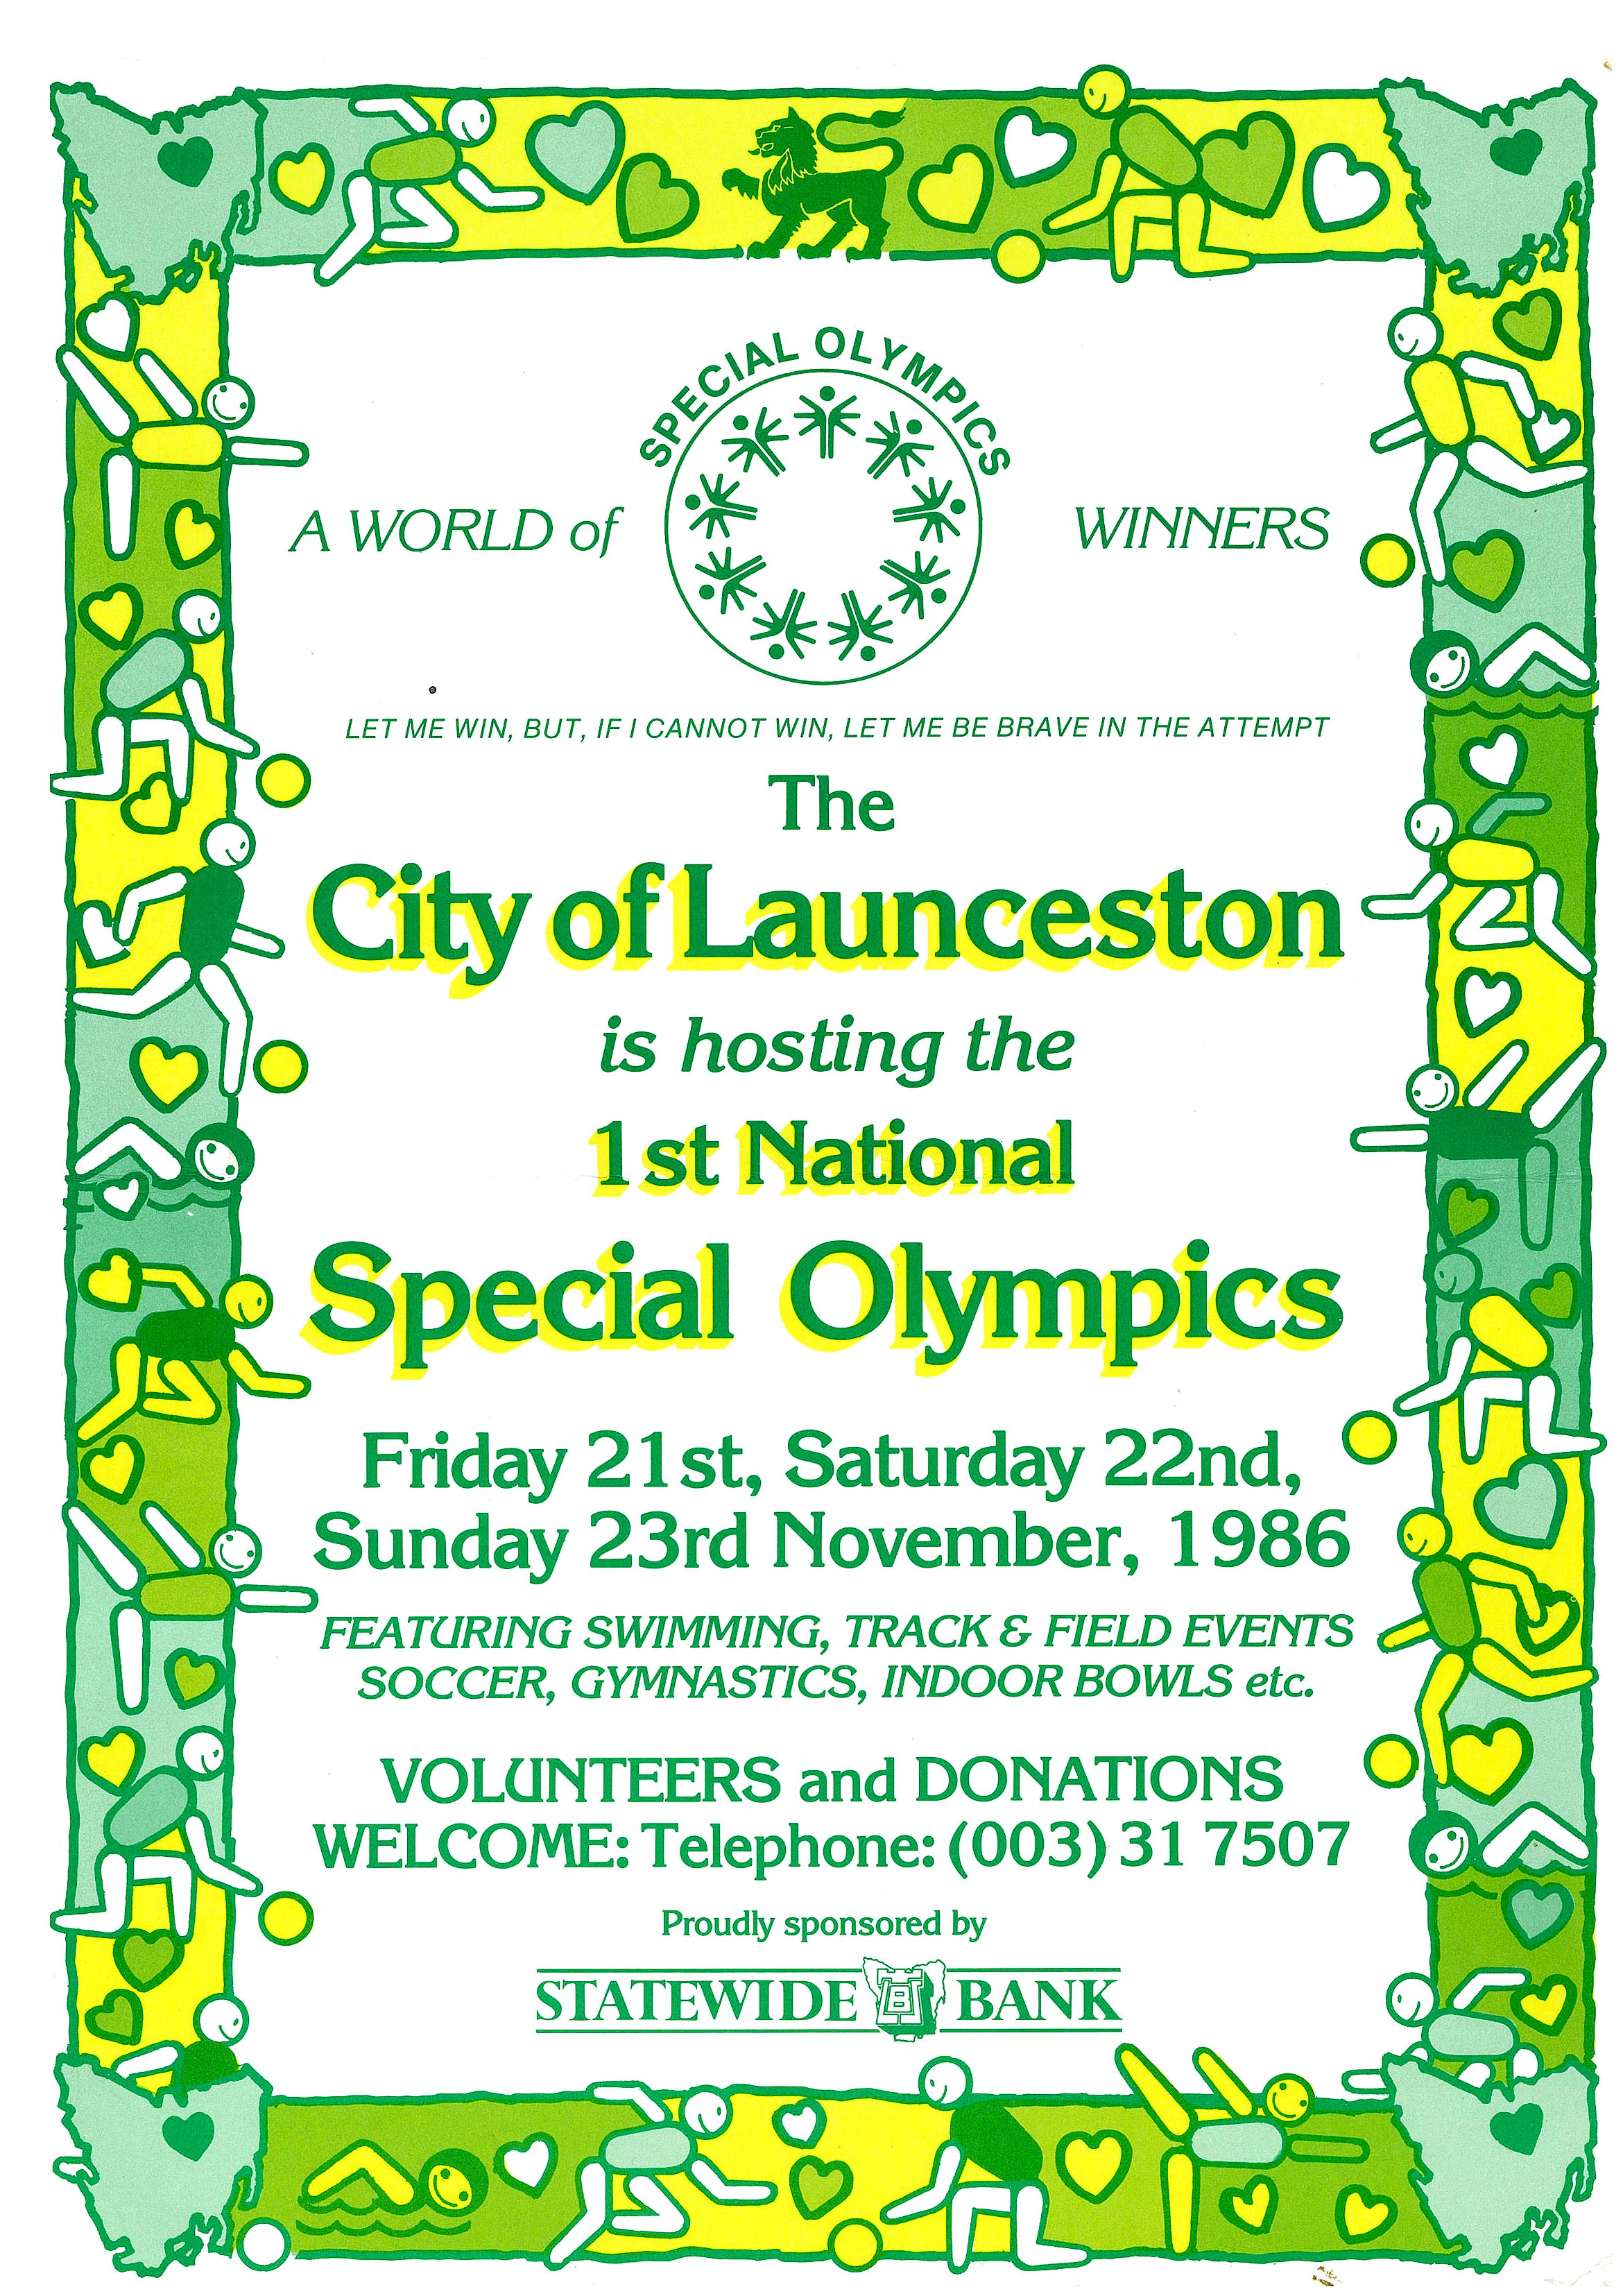 A poster to promote the first National Special Olympics Games that were held in Launceston in 1986. Ausnew Home Care, NDIS registered provider, My Aged Care